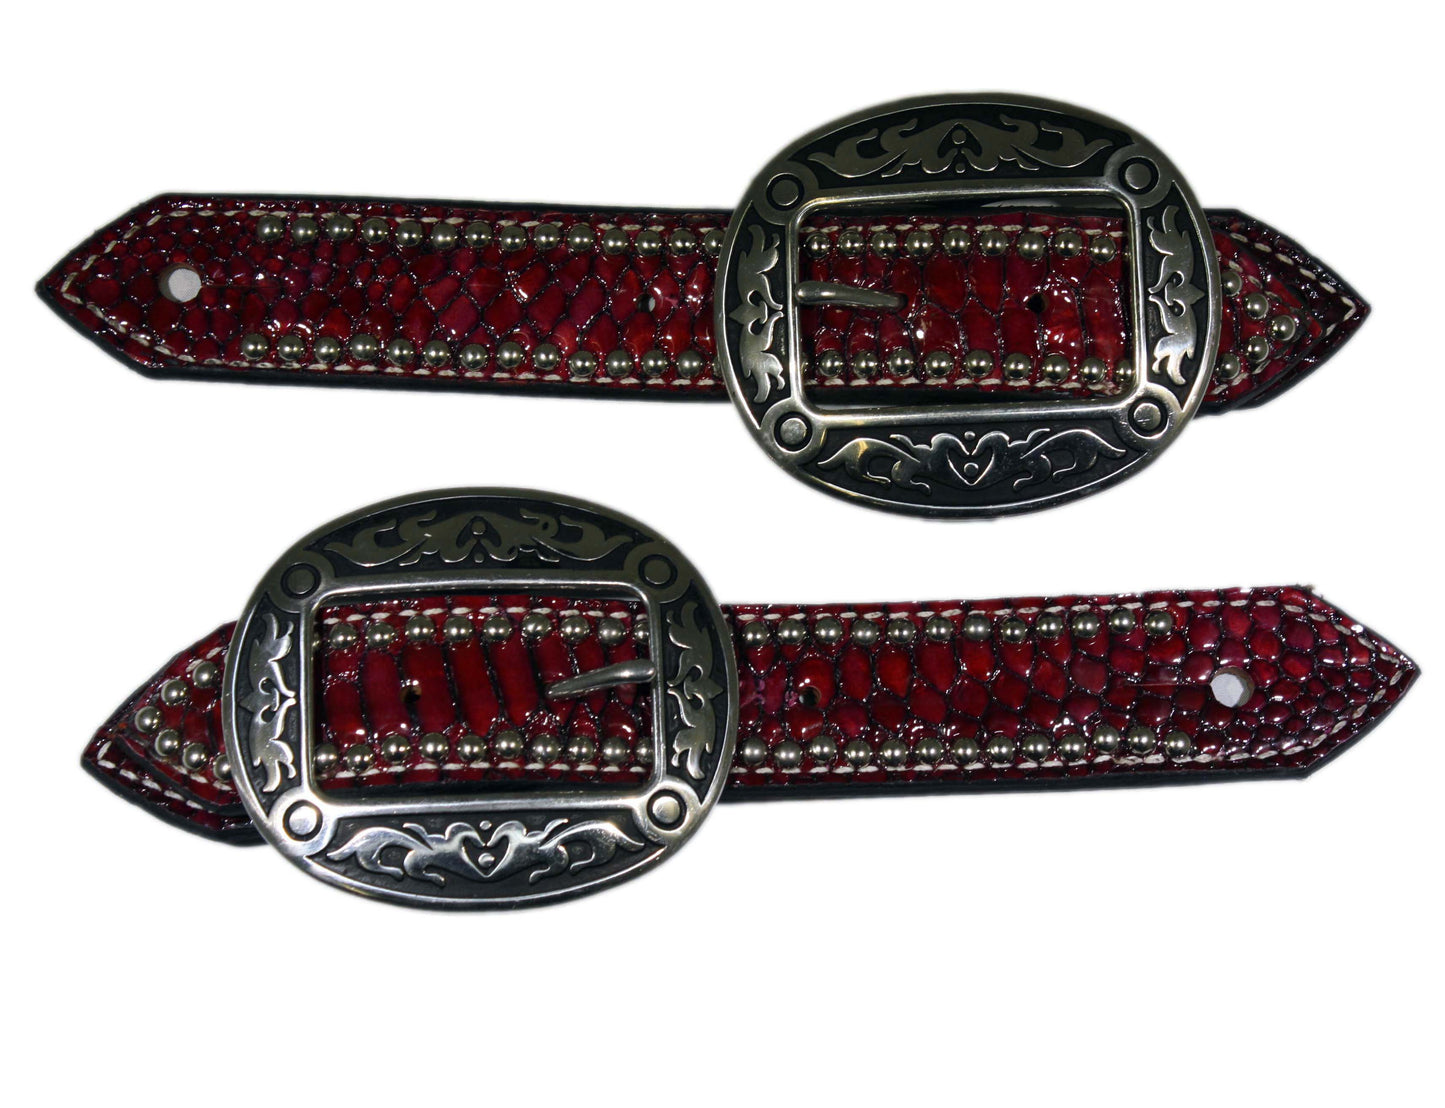 Picture of C&L Belt Style Hair On Zebra Spur Straps SS000008